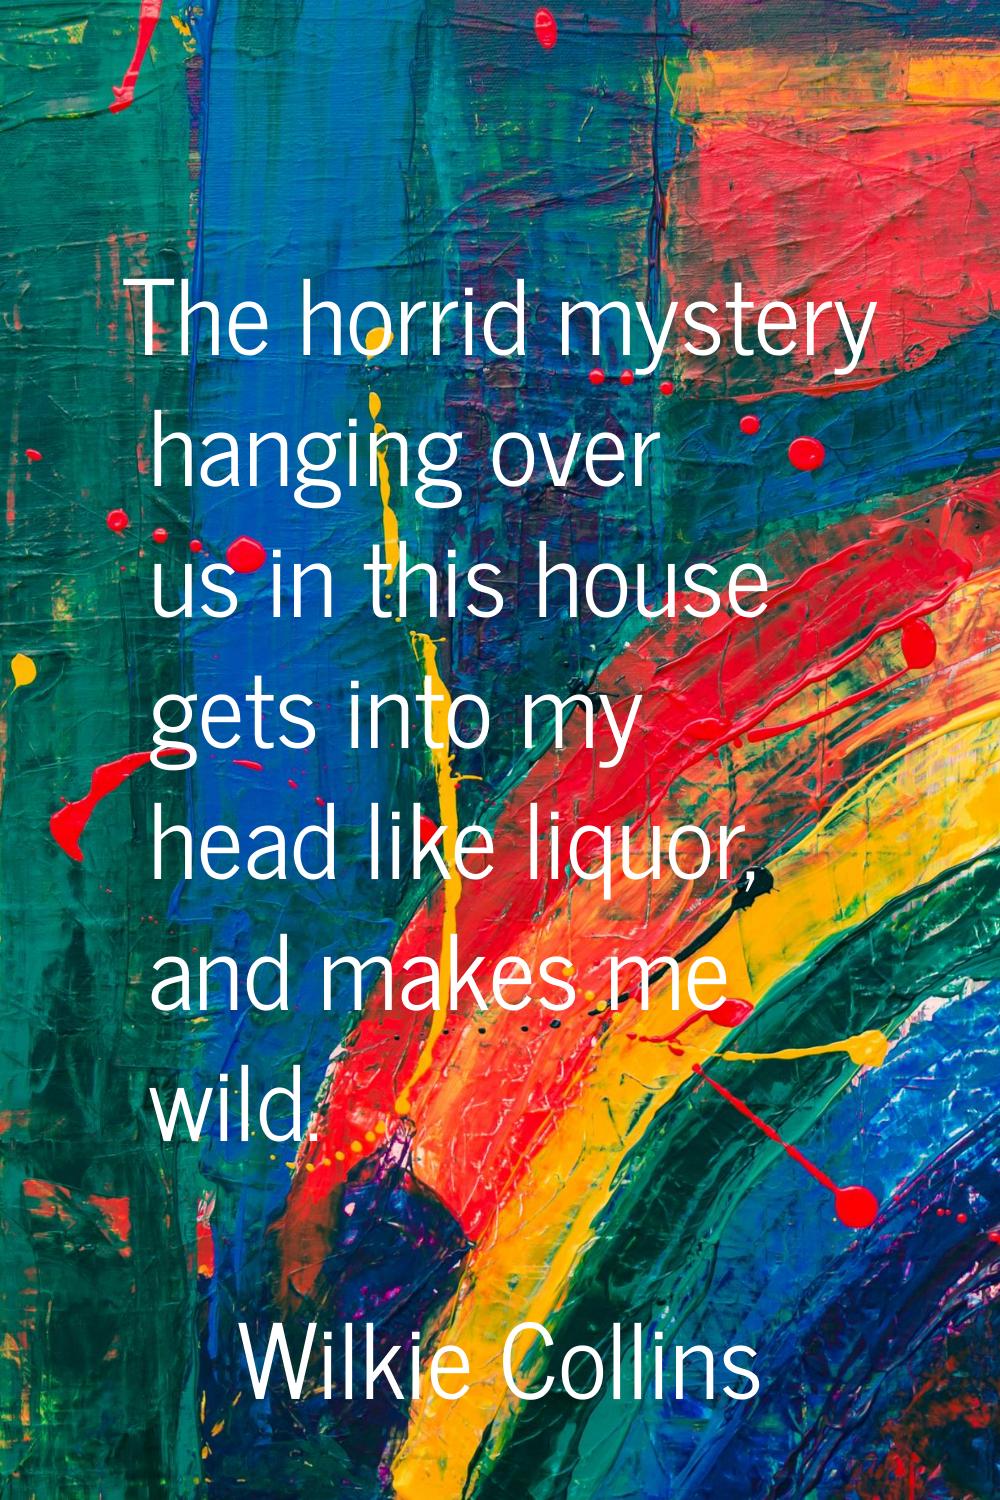 The horrid mystery hanging over us in this house gets into my head like liquor, and makes me wild.